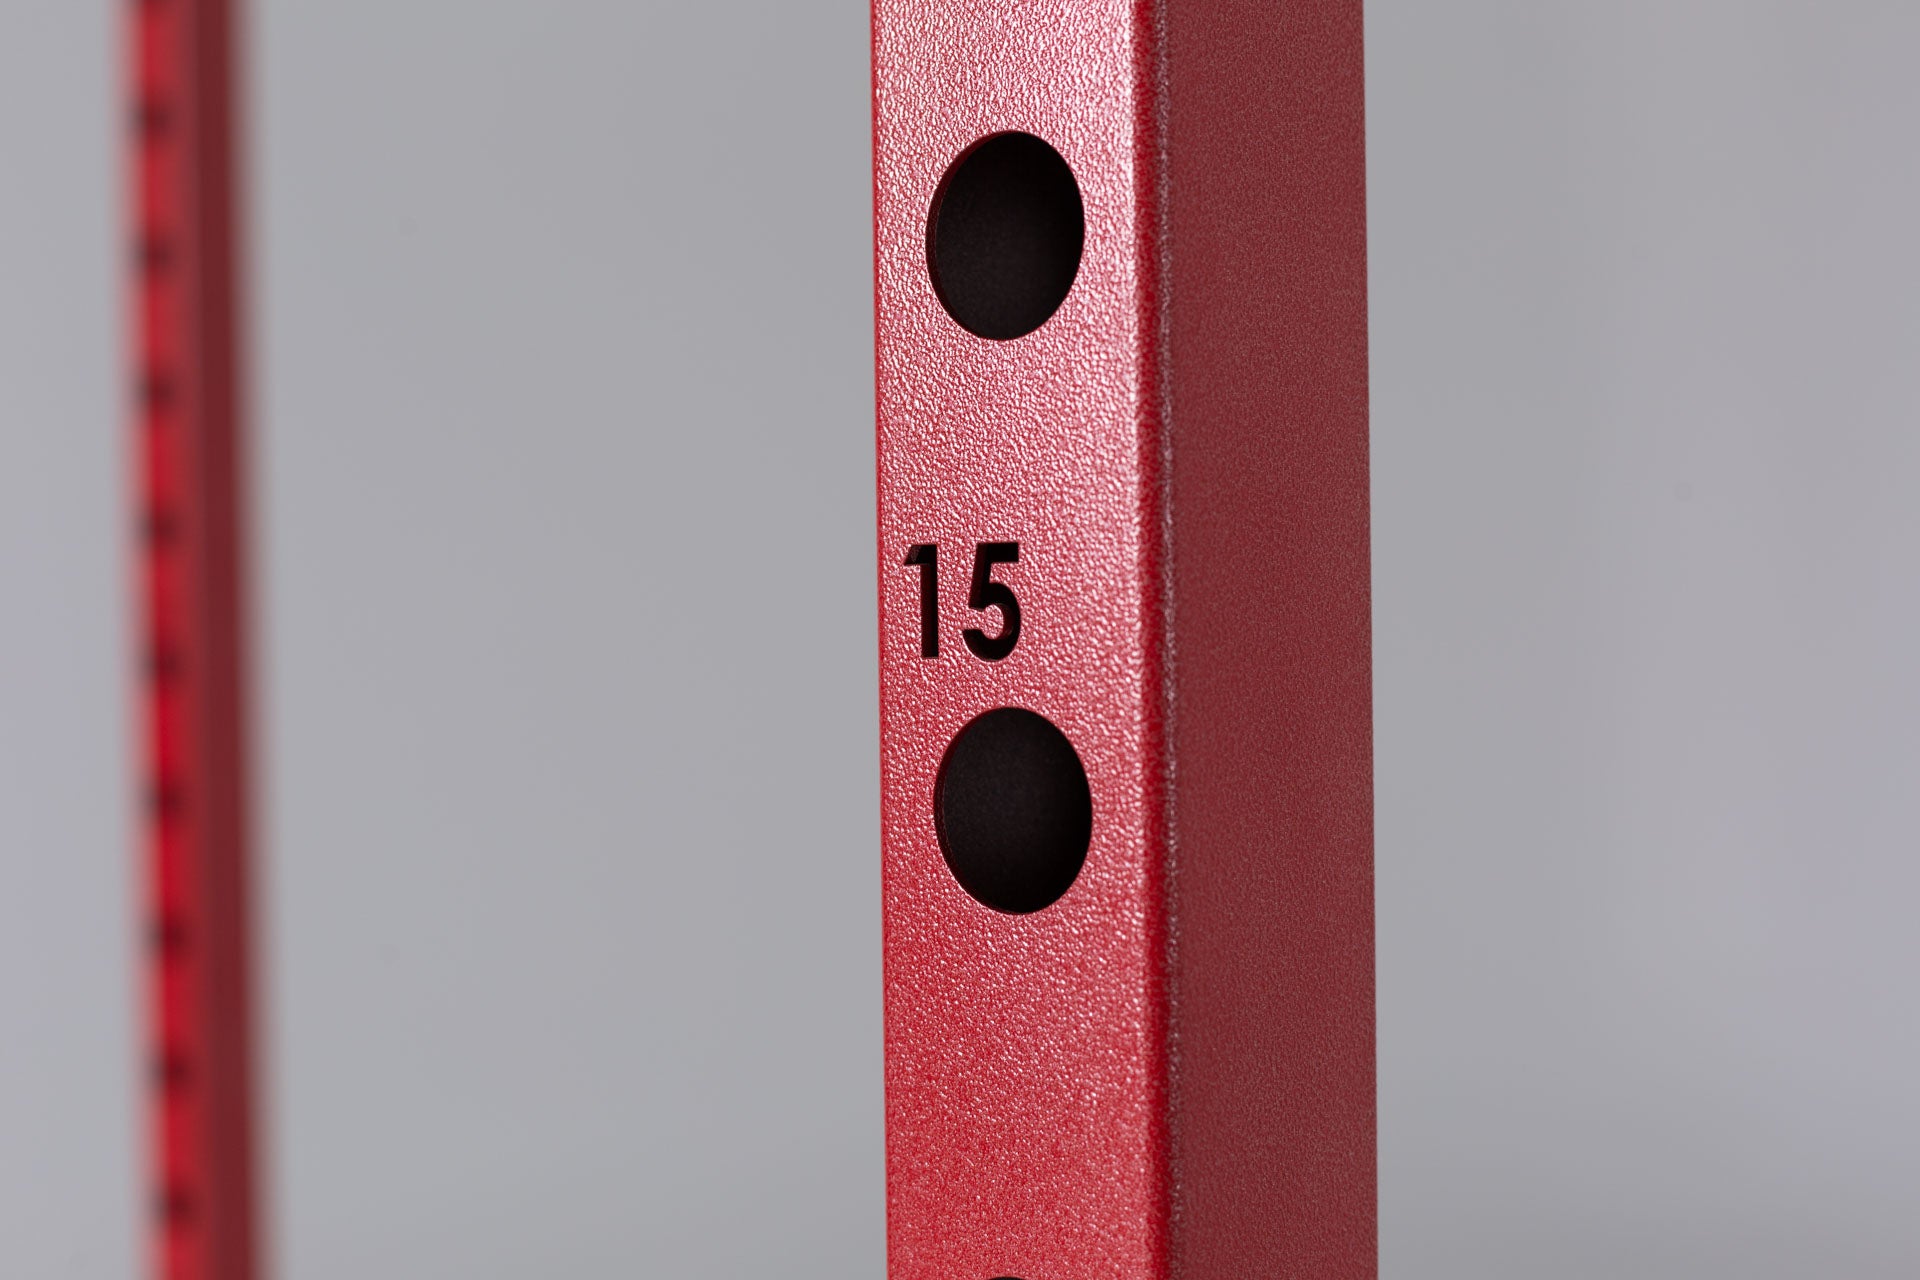 PR-1100 Power Rack in Red. Close up of Rack Upright Holes and Laser-Cut Number)